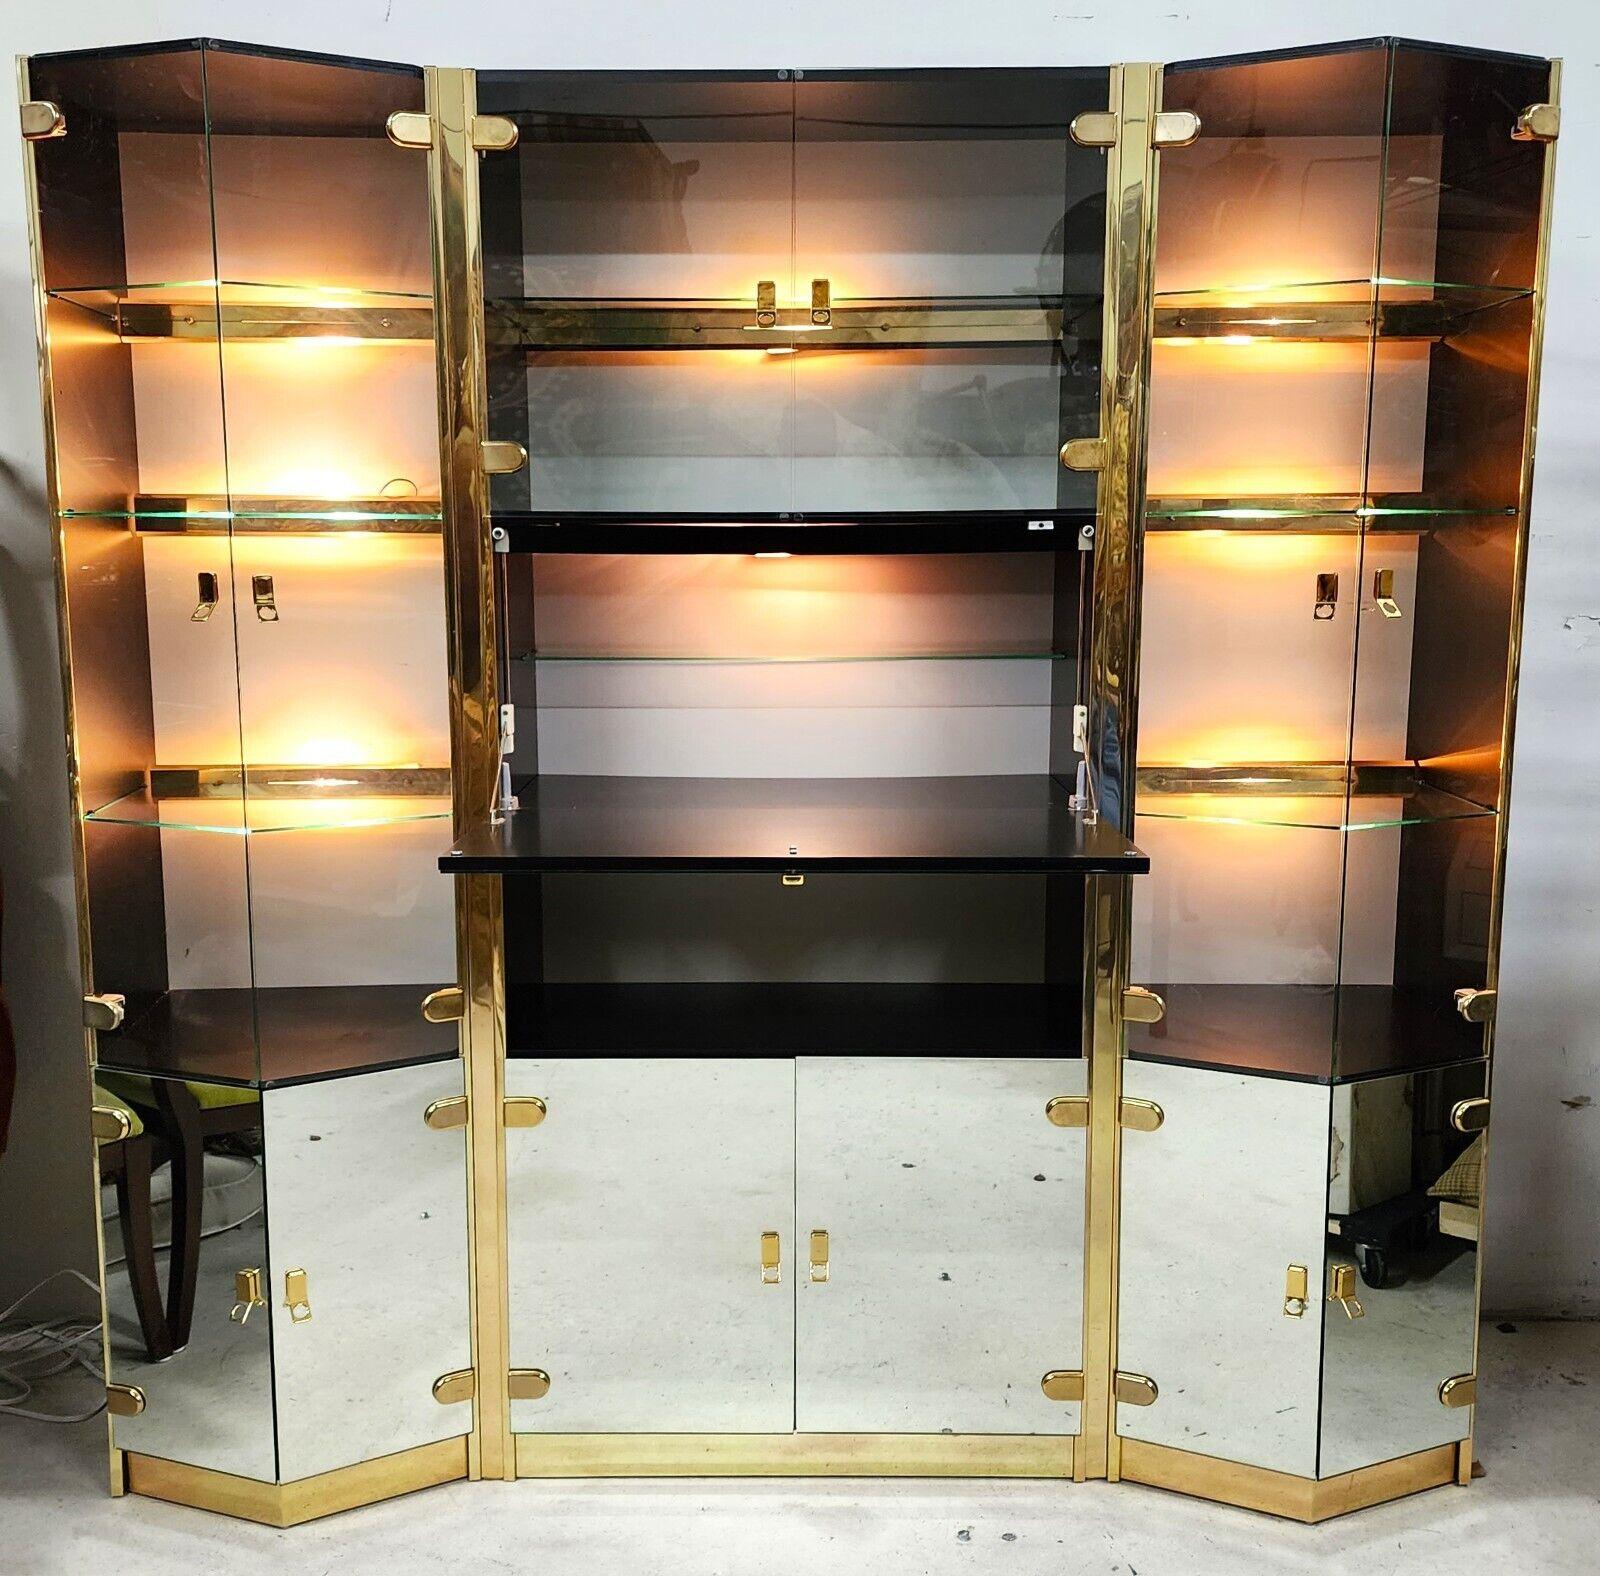 1970s Wall Display Cabinet with Dry Bar In Good Condition For Sale In Lake Worth, FL